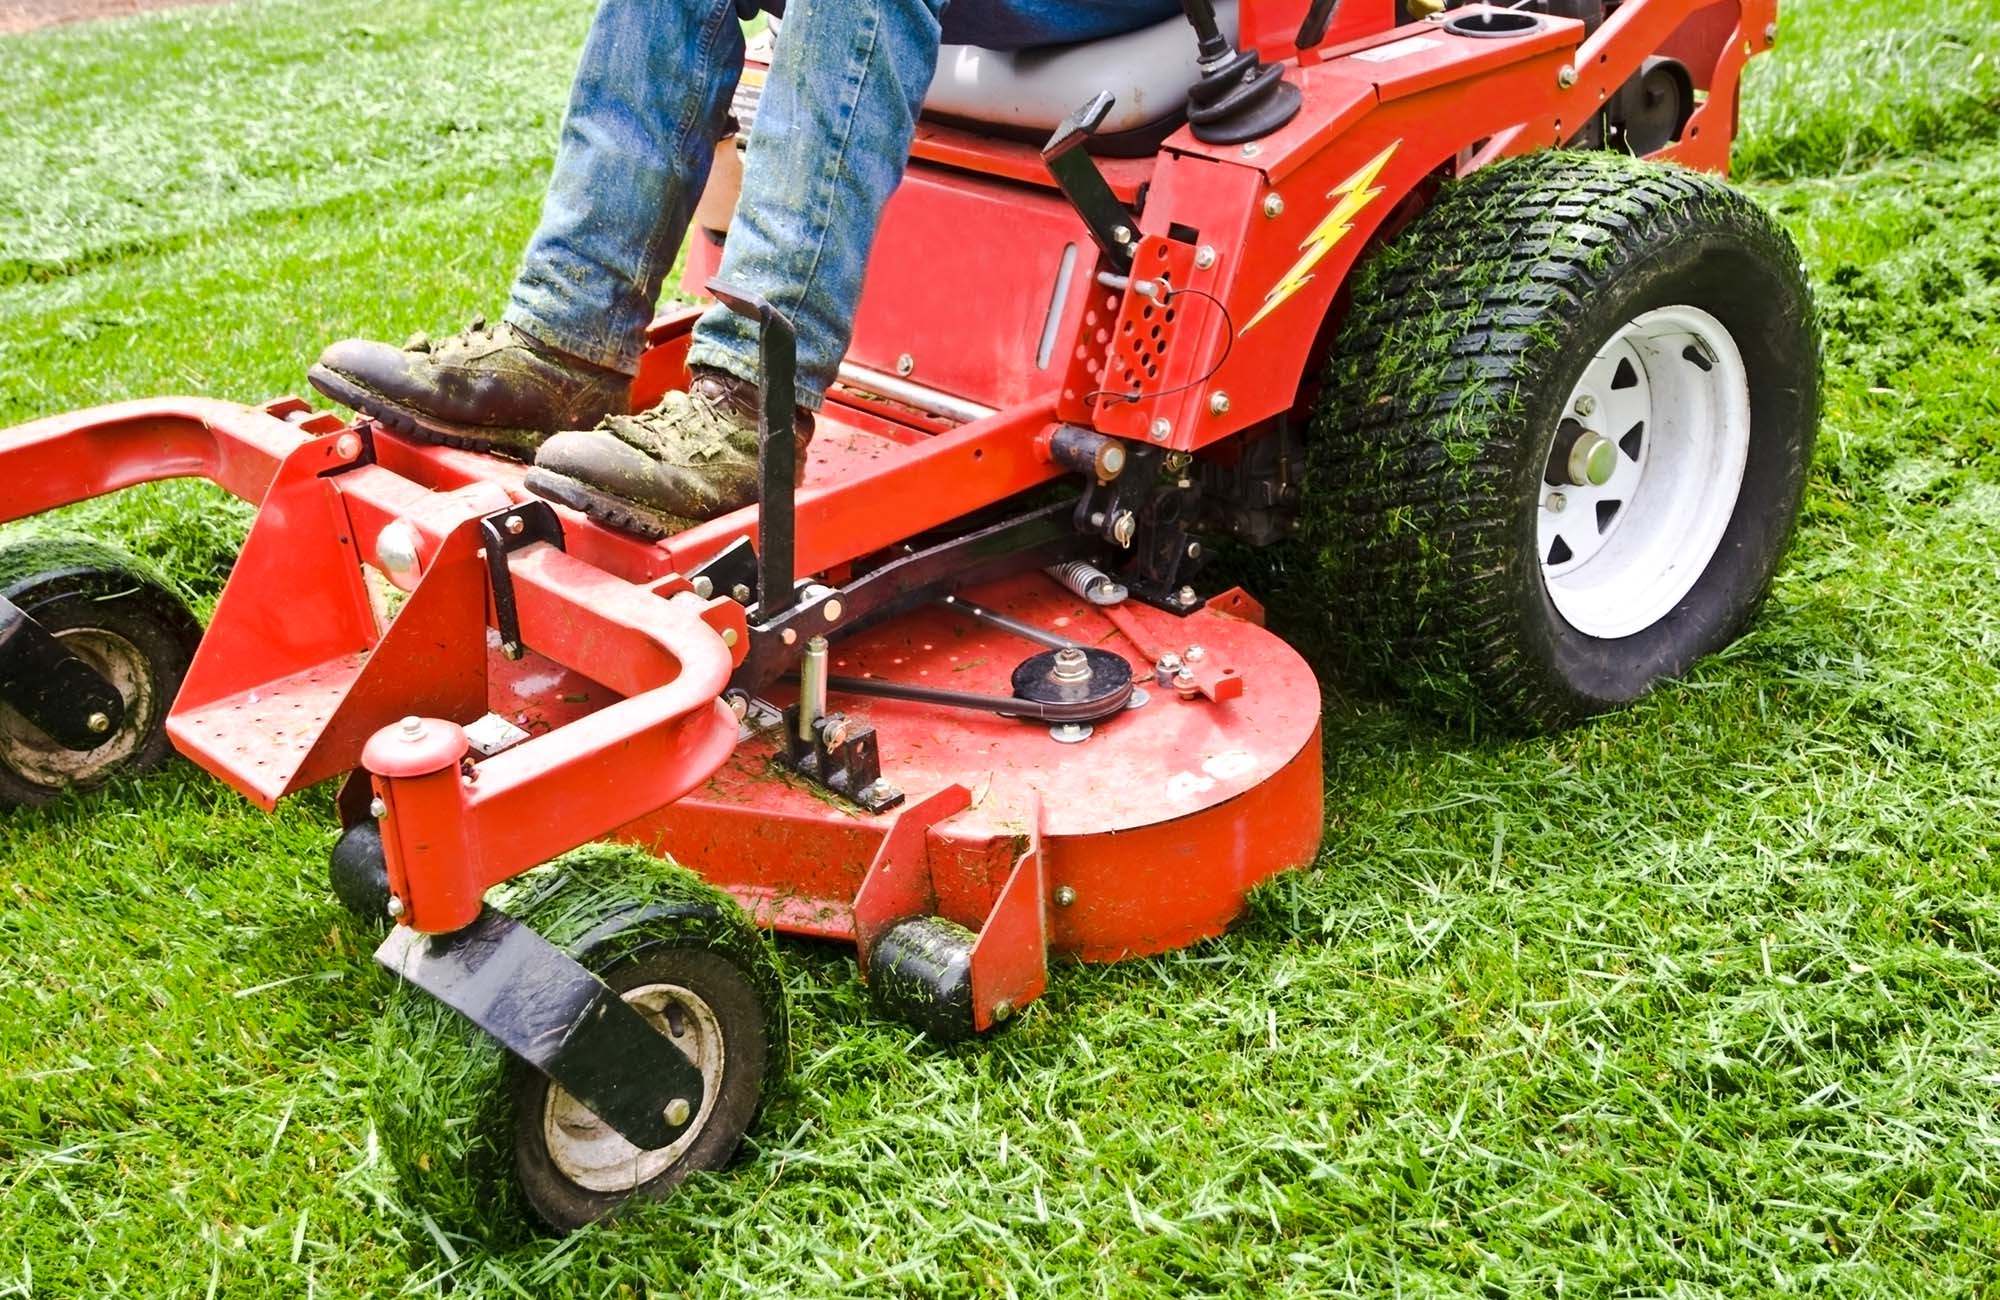 Man on a riding lawn mower that has grass stuck to the wheels. Spring and summer outdoor maintenance.